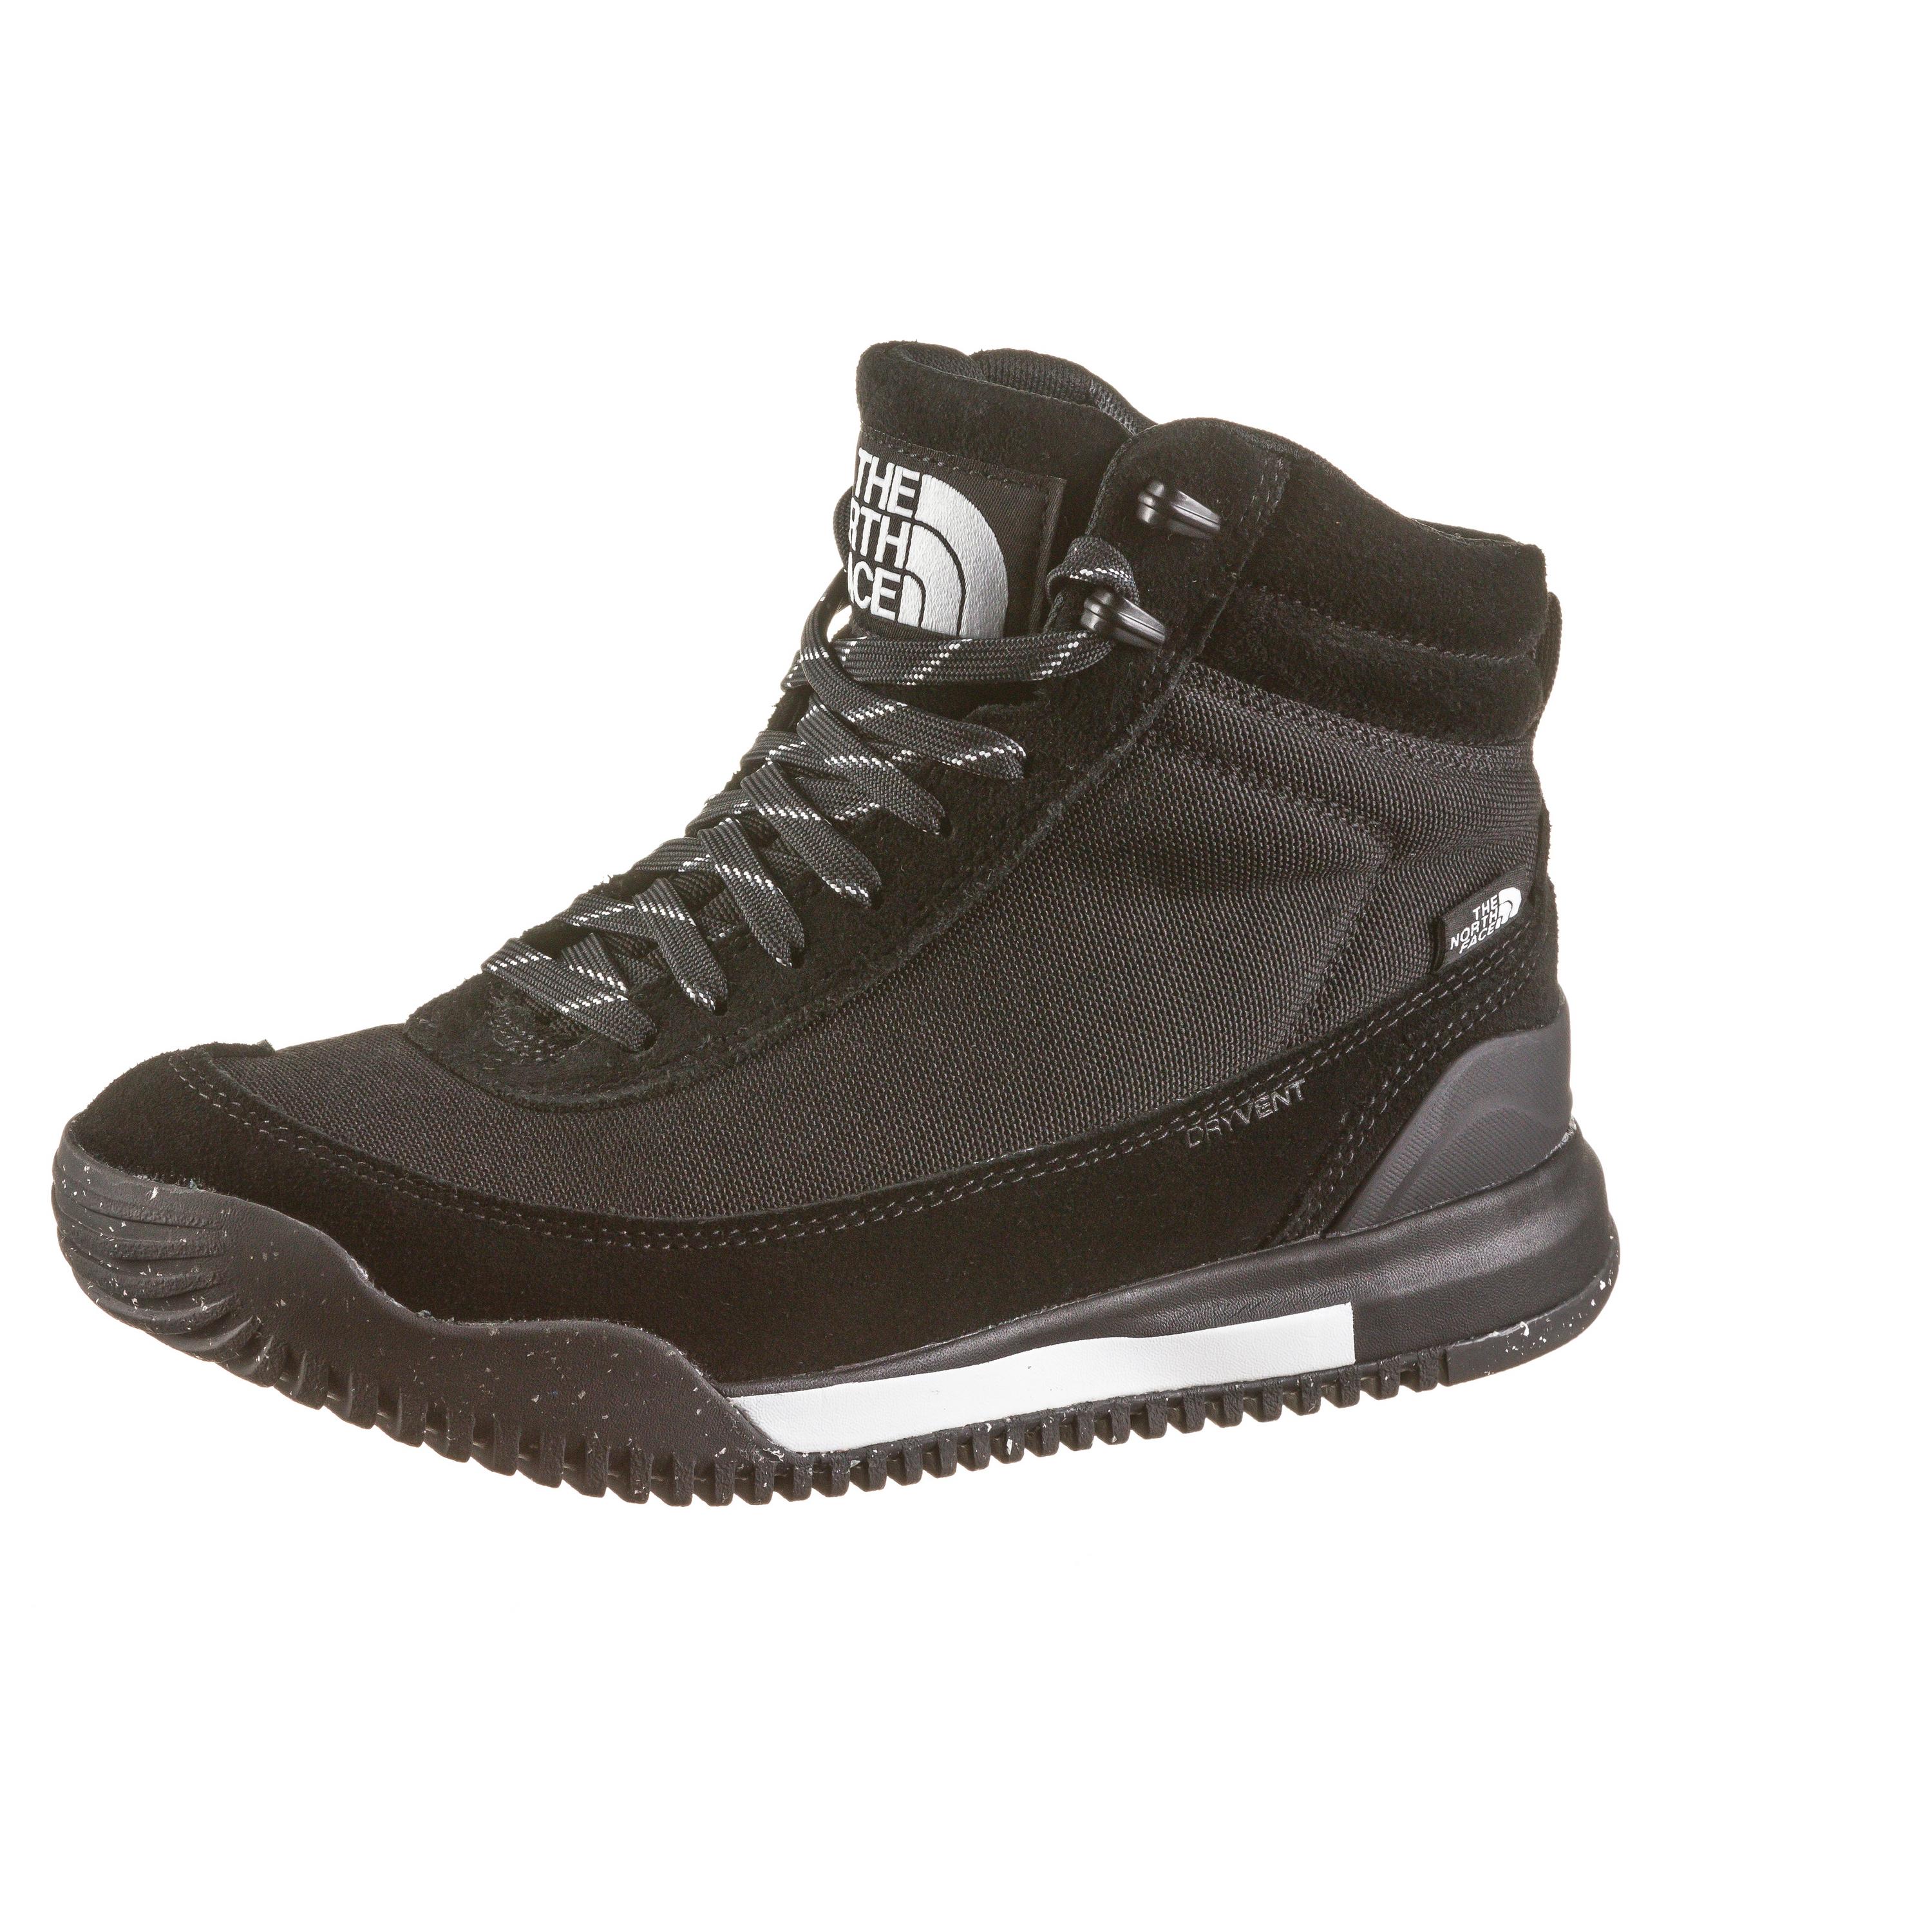 Image of The North Face Back to Berkeley III Boots Damen